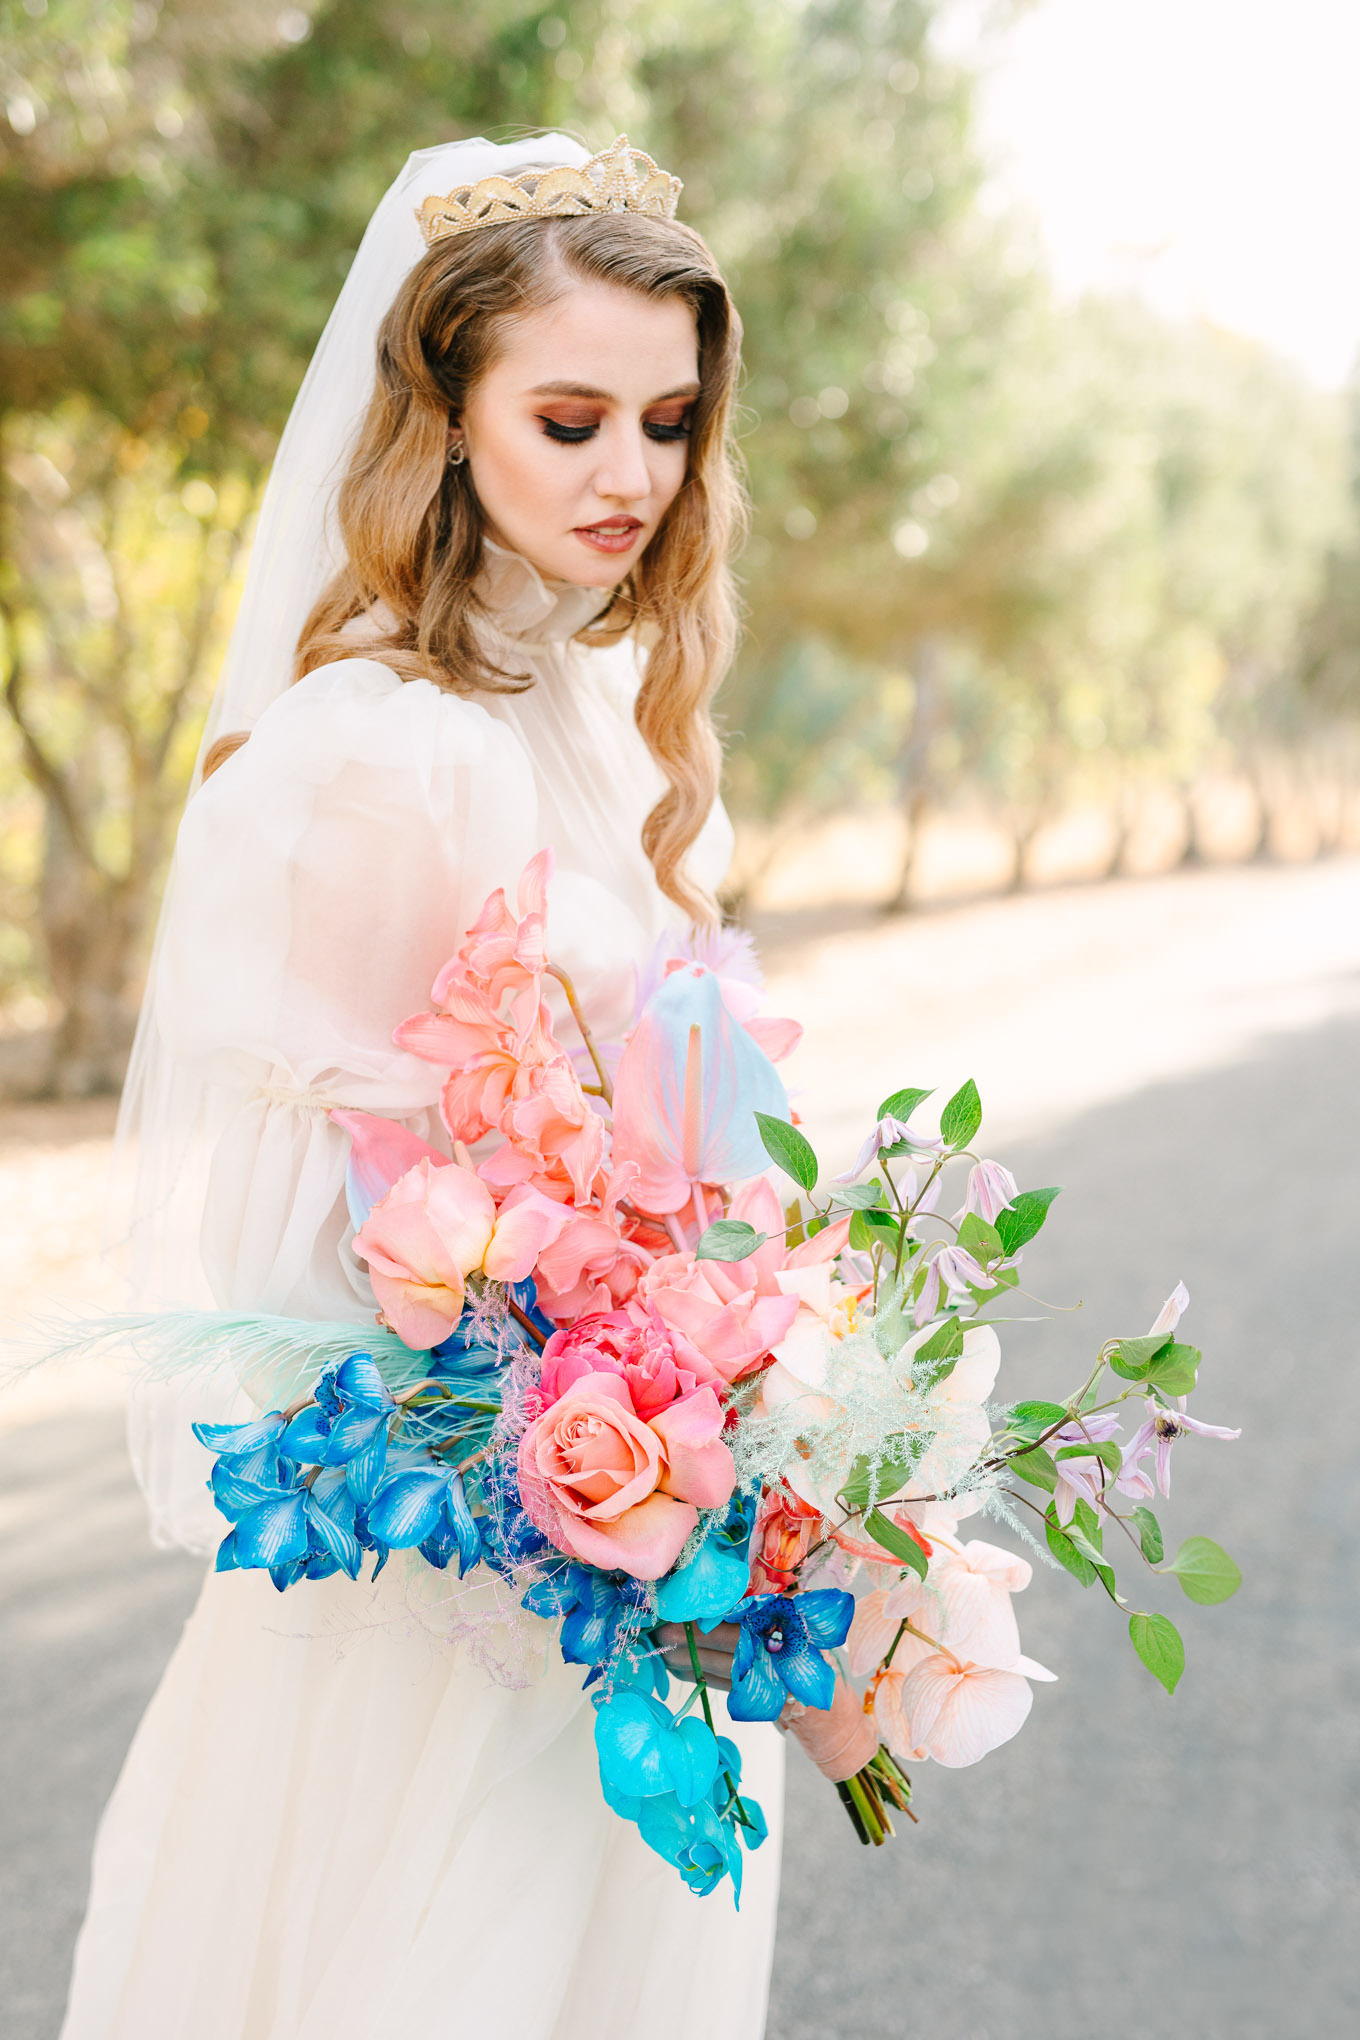 Vibrant bridal bouquet | Colorful and quirky wedding at Higuera Ranch in San Luis Obispo | #sanluisobispowedding #californiawedding #higueraranch #madonnainn   Source: Mary Costa Photography | Los Angeles